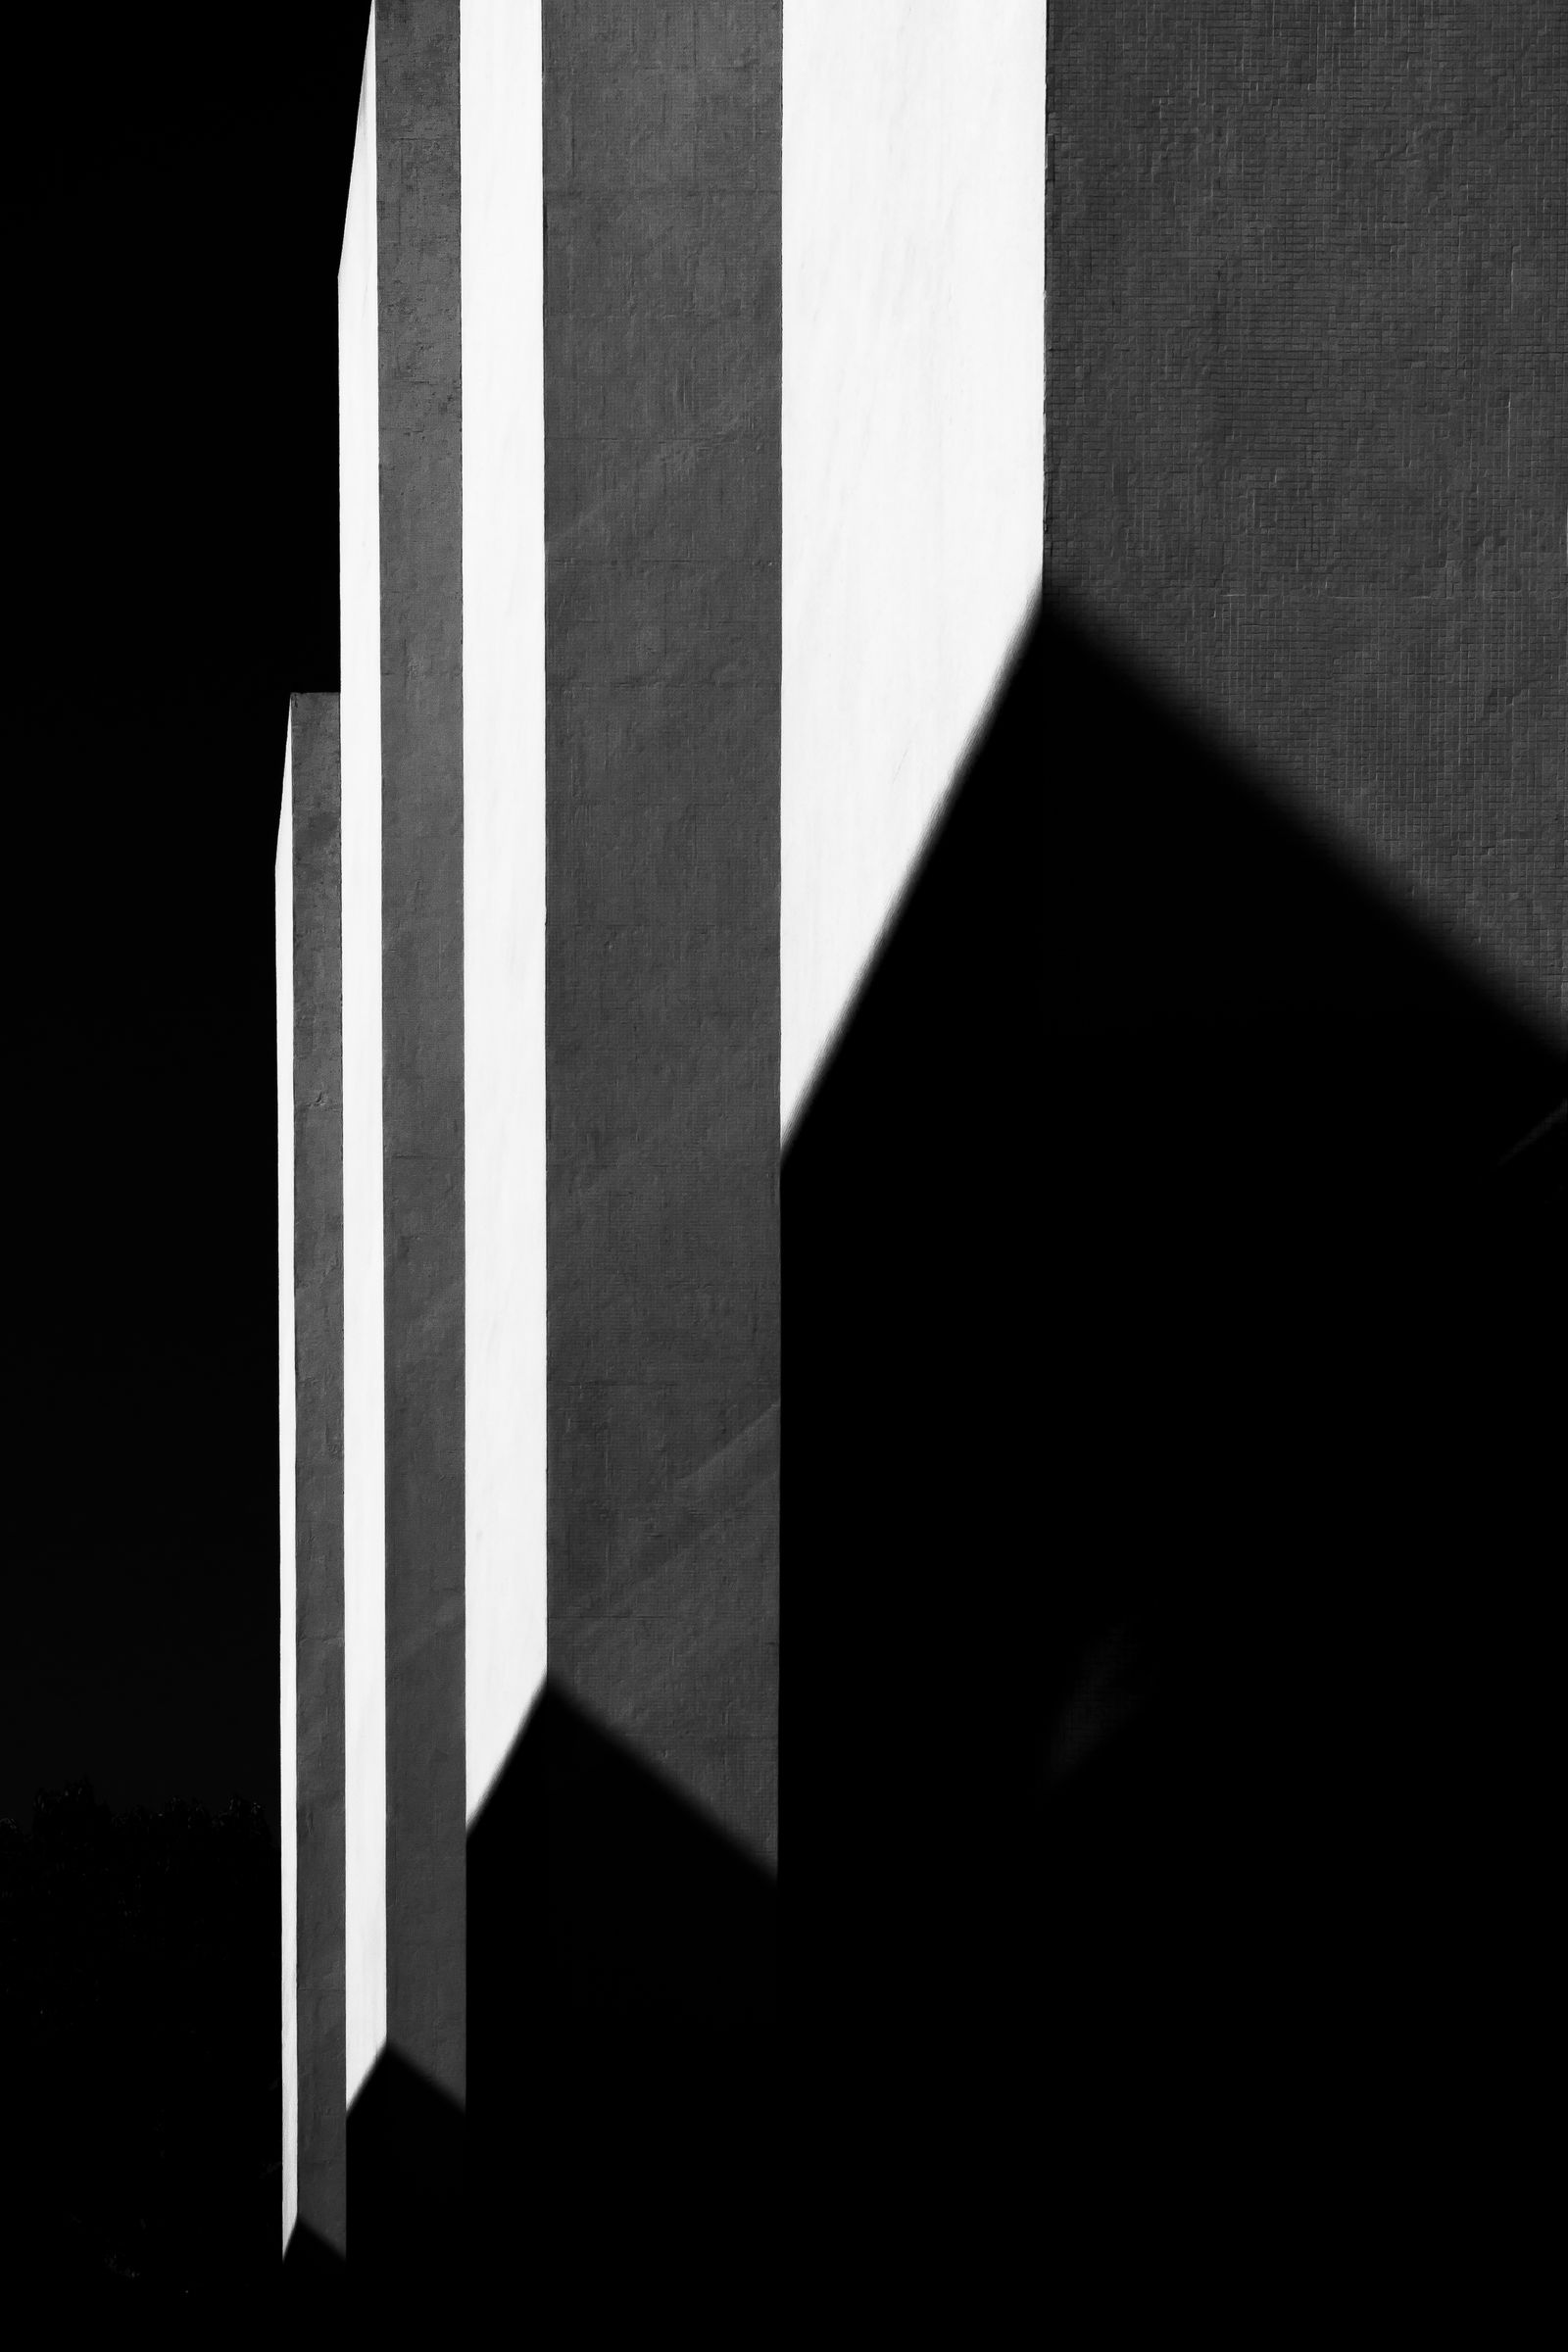 © José Roberto Bassul - Image from the Lines of Shadow photography project